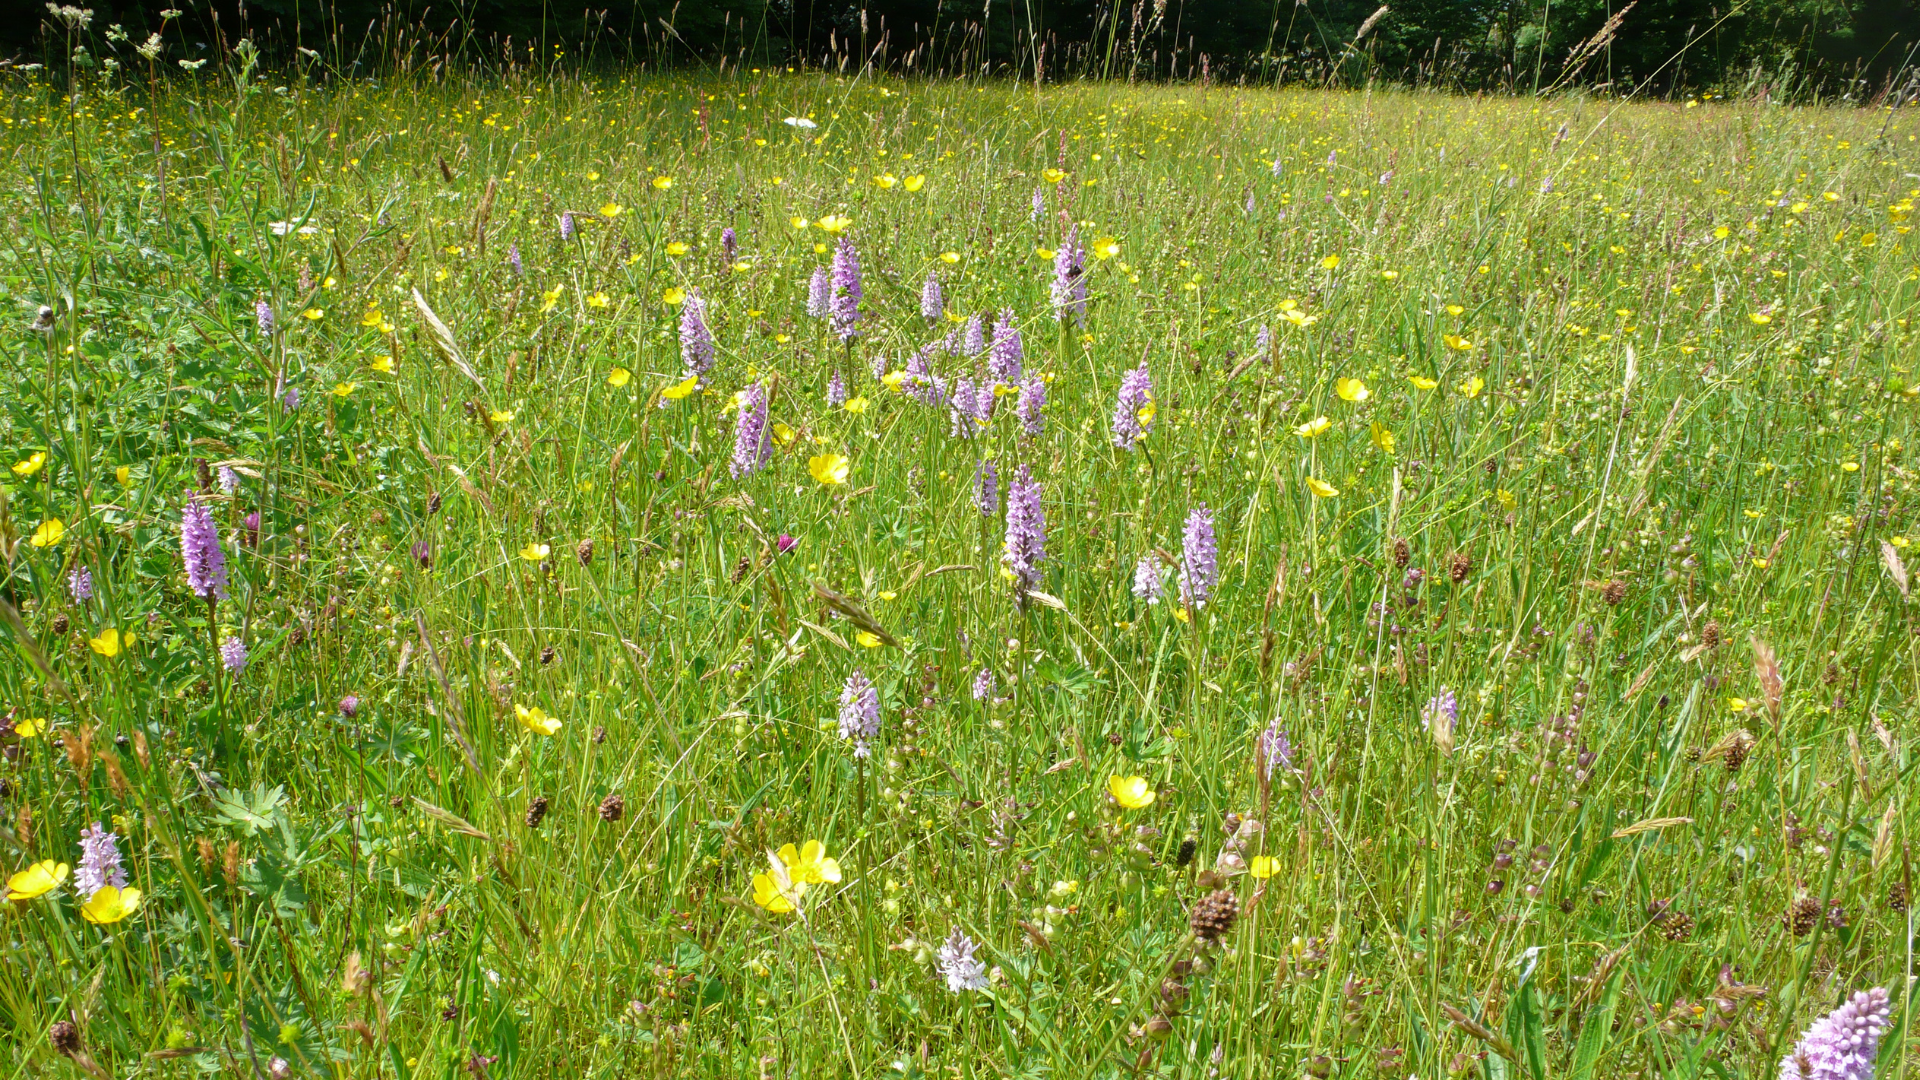 Meadow with orchids - Copyright Sarah Carver